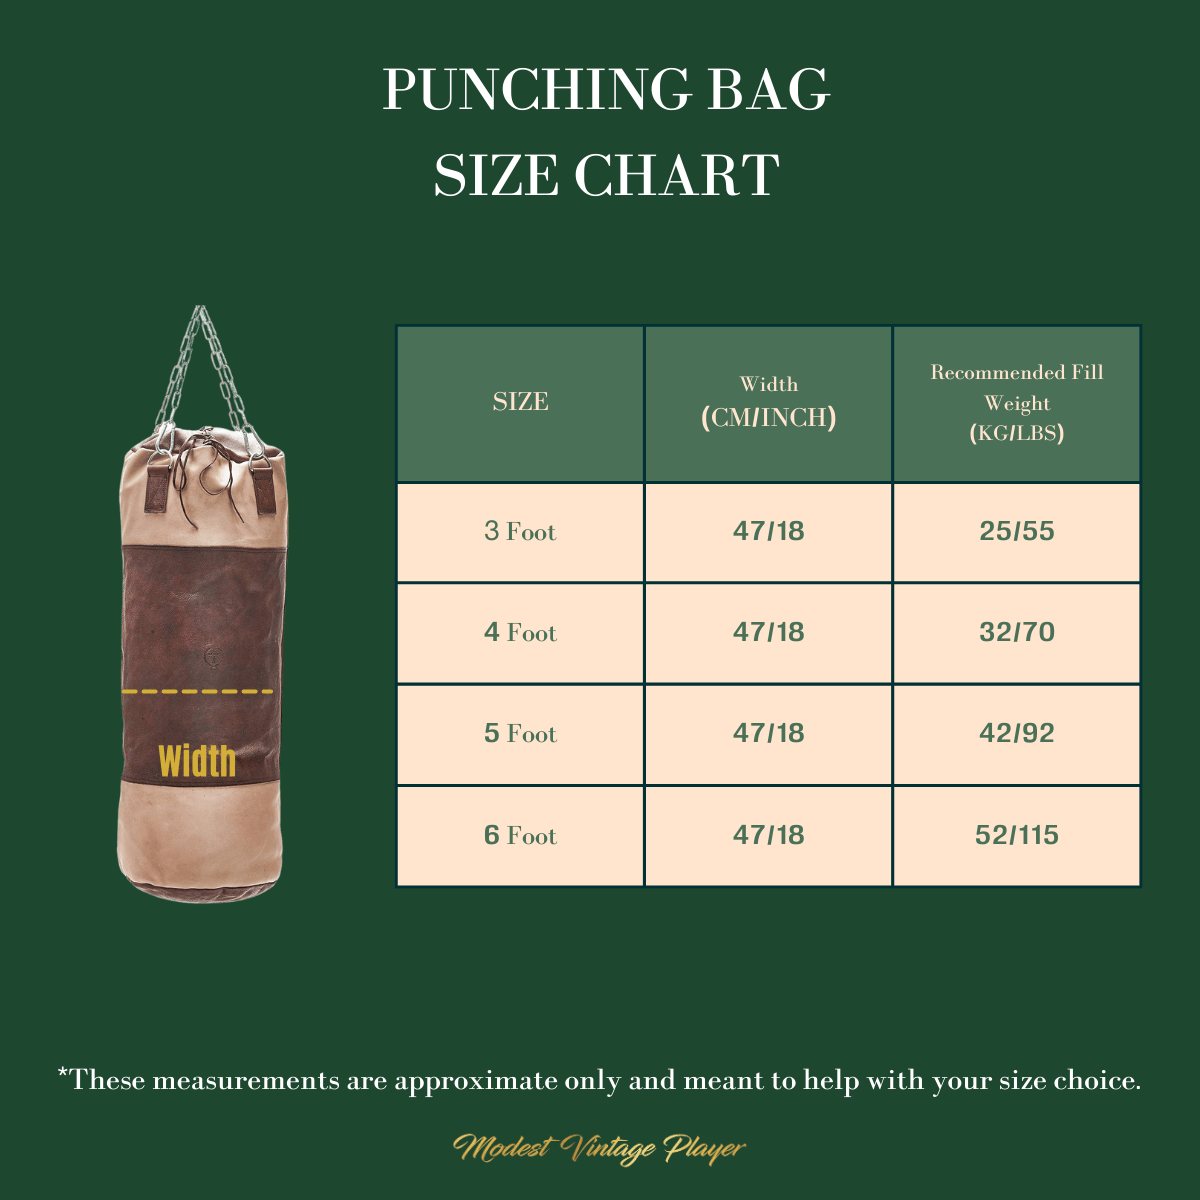 RETRO Cream / Brown Leather Heavy Punching Bag (un-filled) - MODEST VINTAGE PLAYER LTD